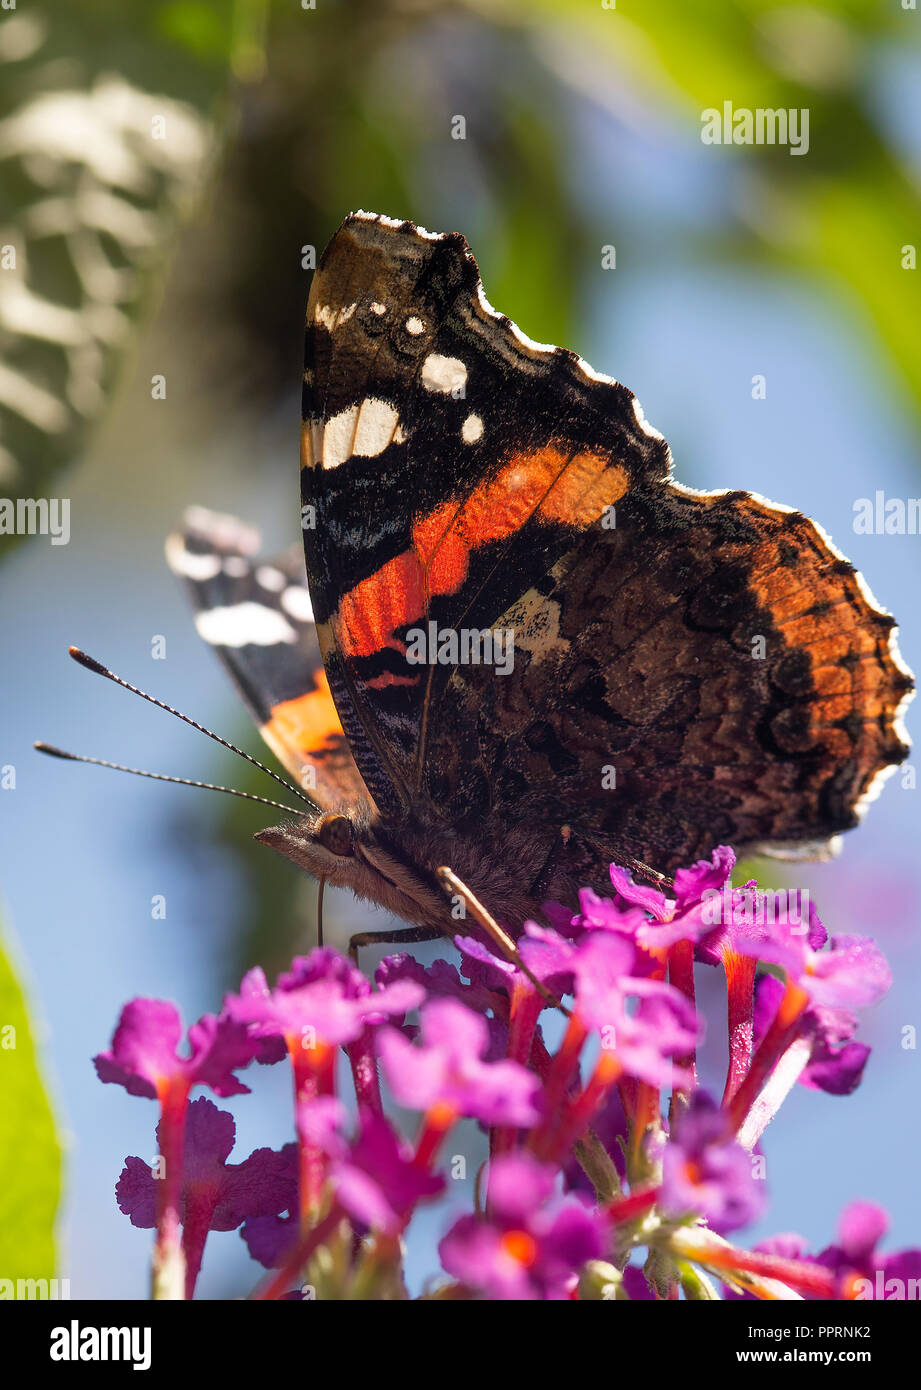 A Red Admiral Butterfly Feeding on Nectar on a Purple Buddleia Flower in a Garden in Alsager Cheshire England United Kingdom UK Stock Photo